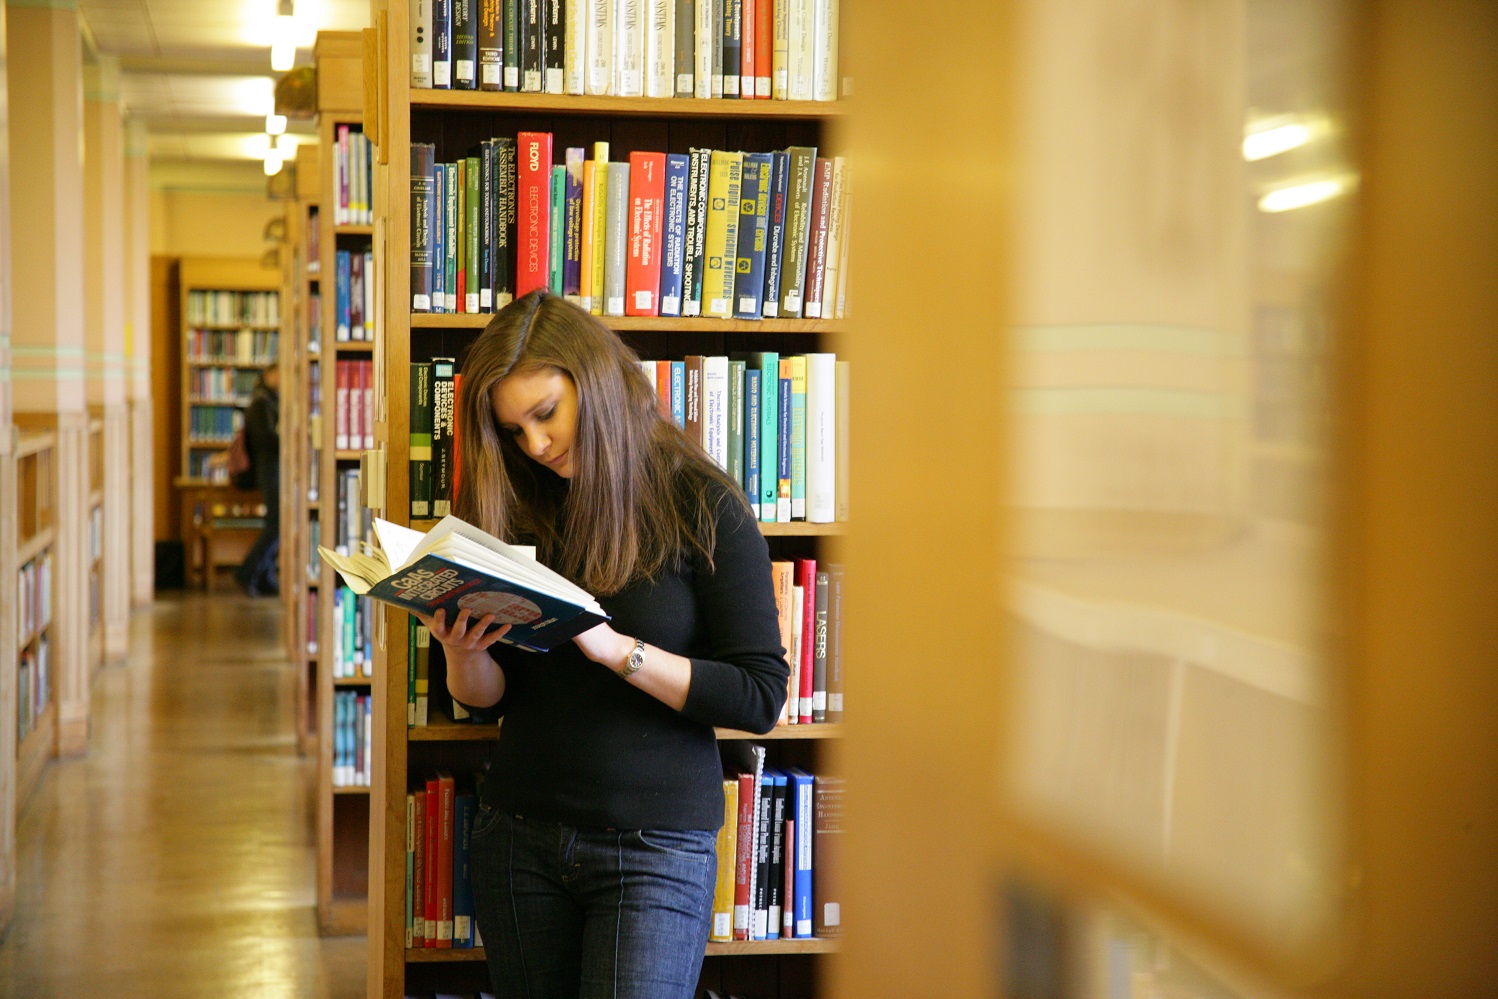 Shows a girl reading a book, in the background are stacks of shelves filled with books.